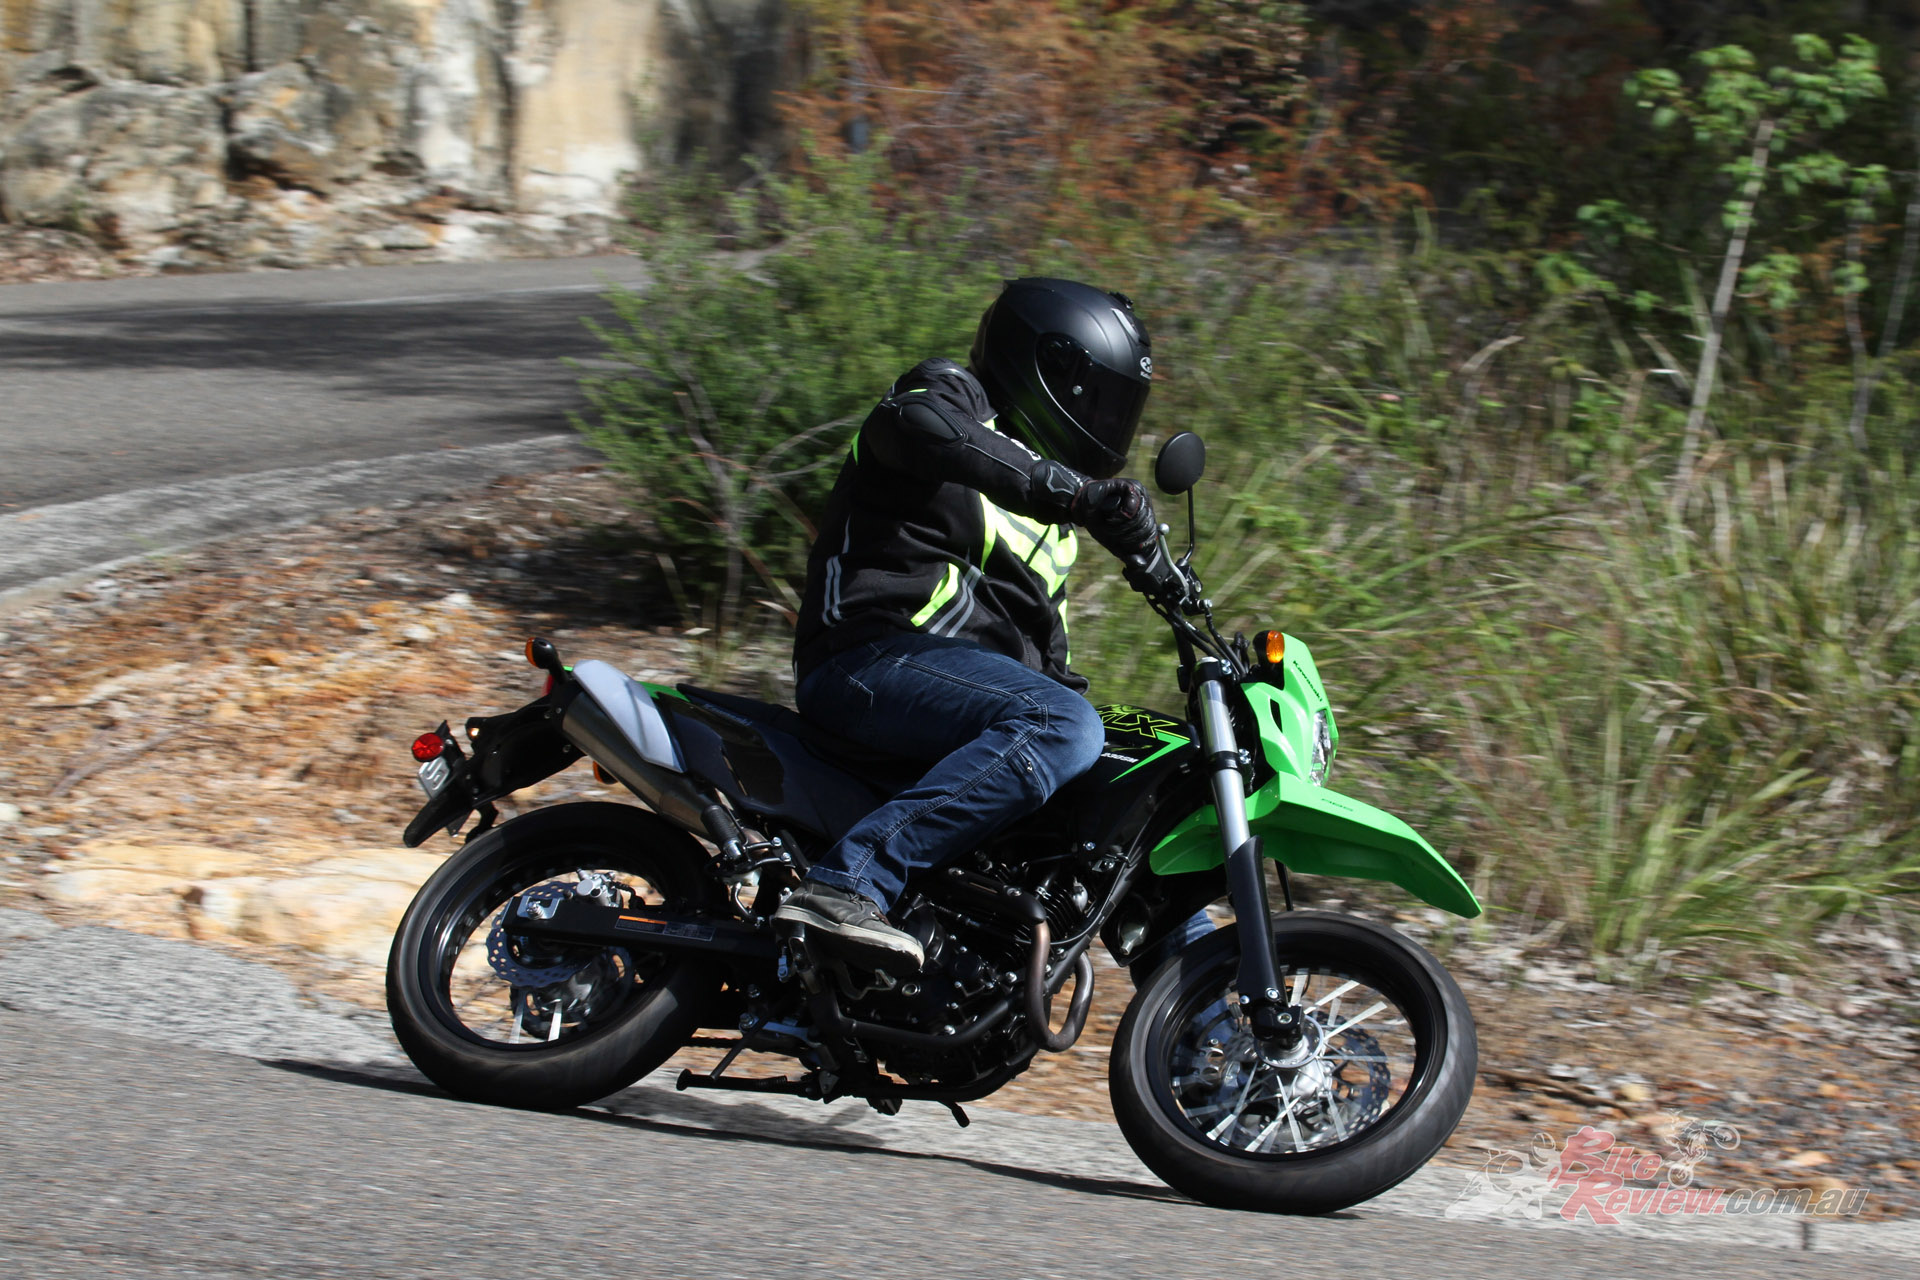 As much as I found the KLX fun in town, it was on the mountain roads that it had me grinning. 